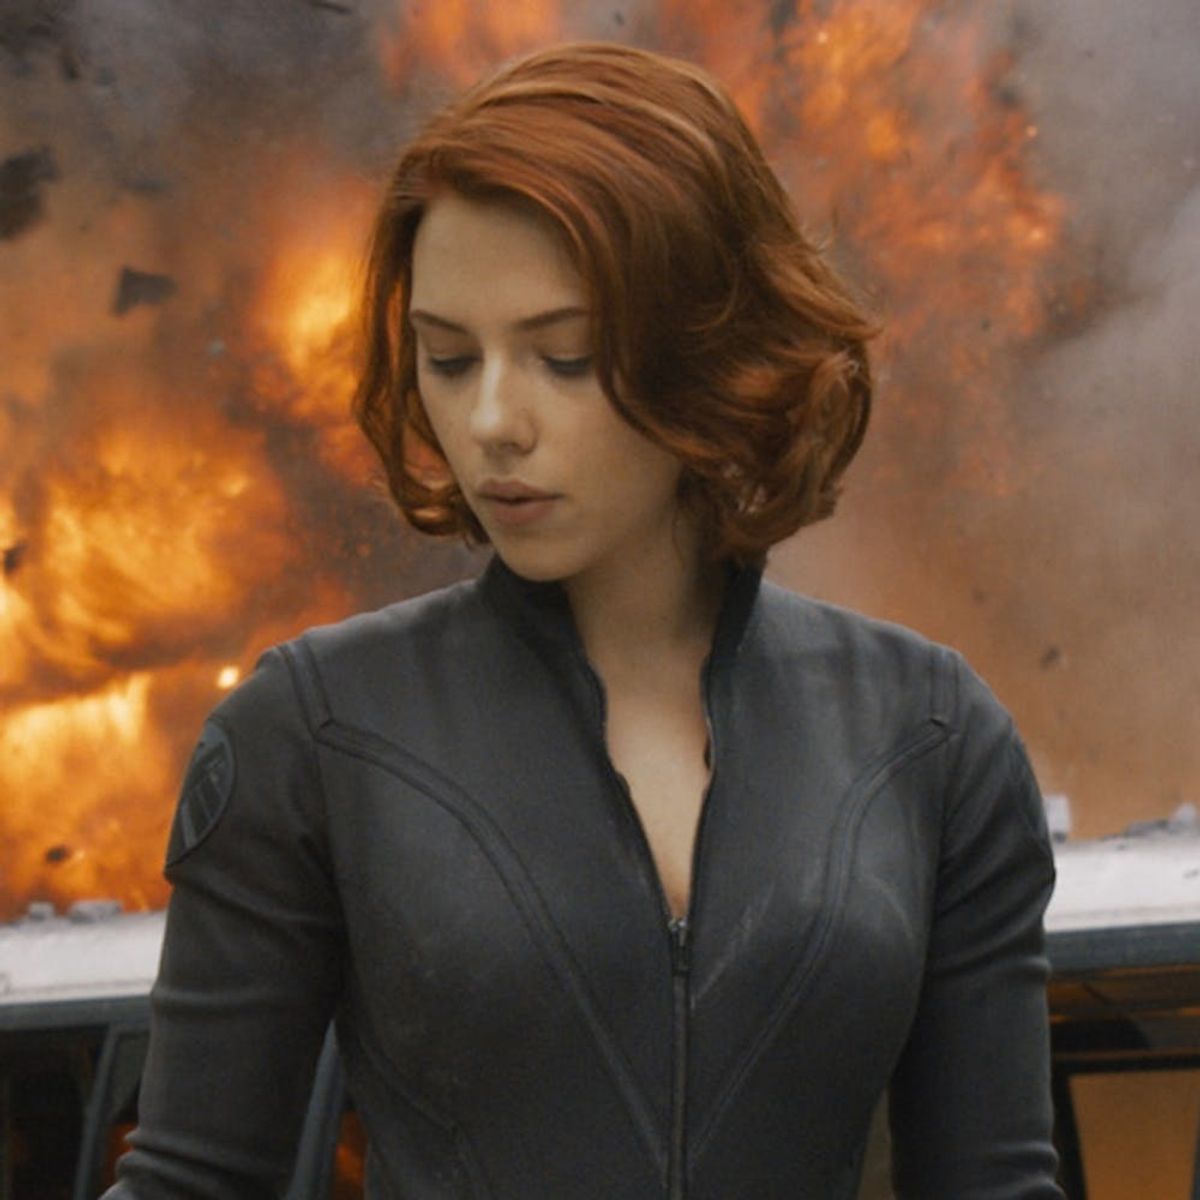 Marvel Is FINALLY Moving Ahead With a Black Widow Solo Film for Scarlett Johansson